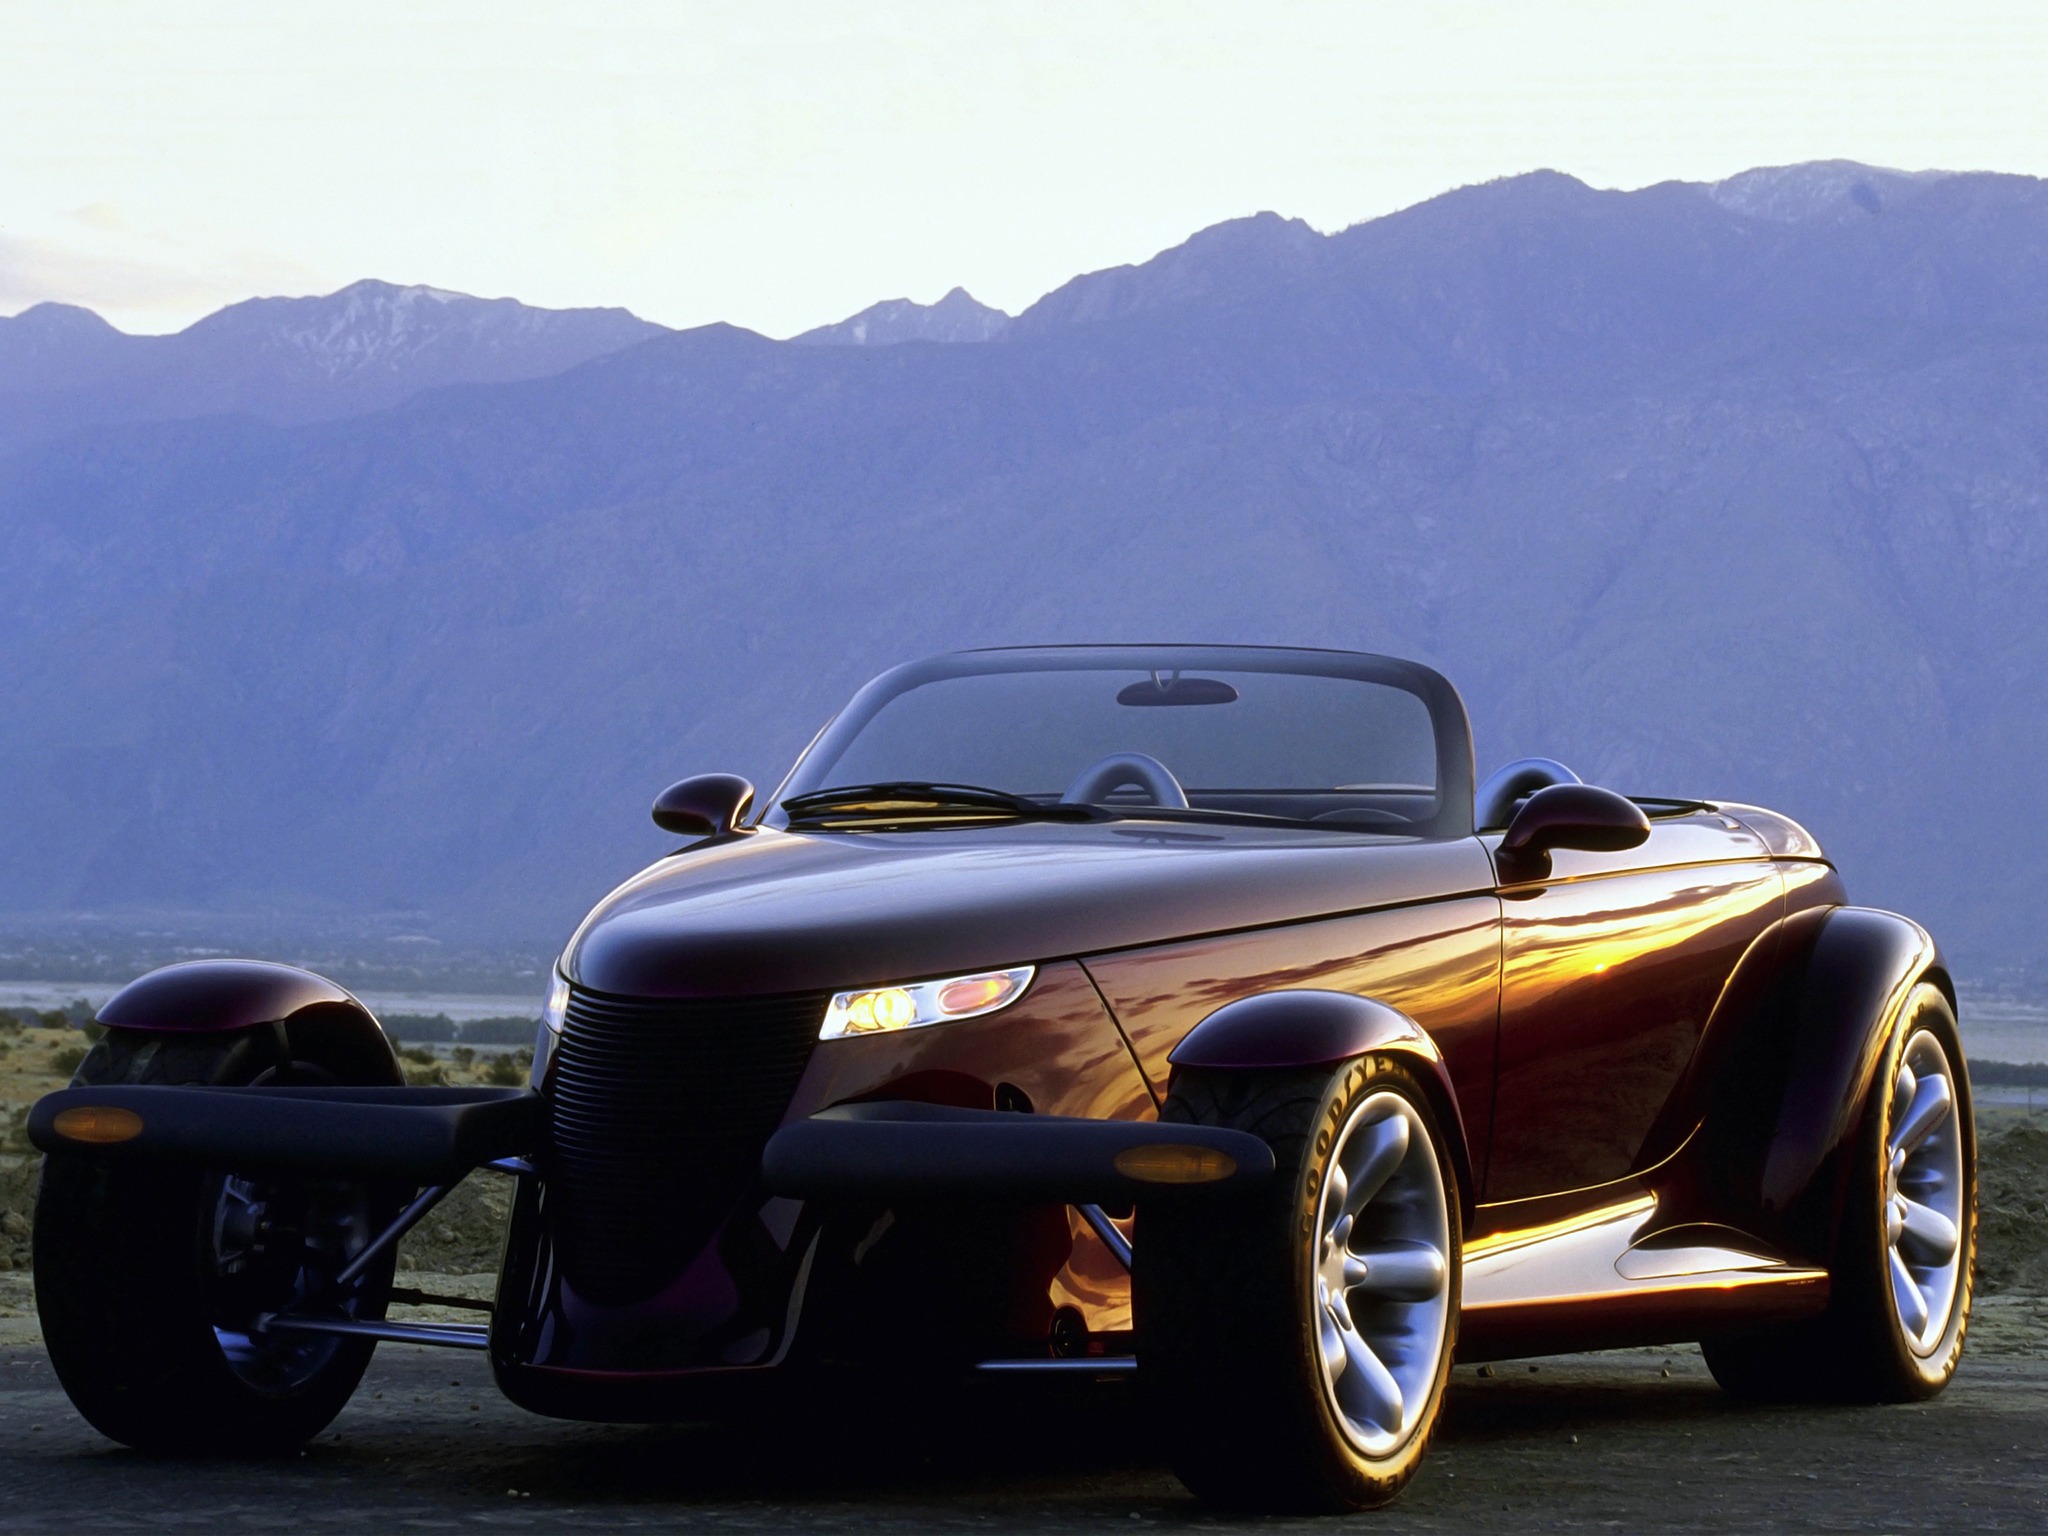 vehicles, plymouth prowler, black car, car, plymouth